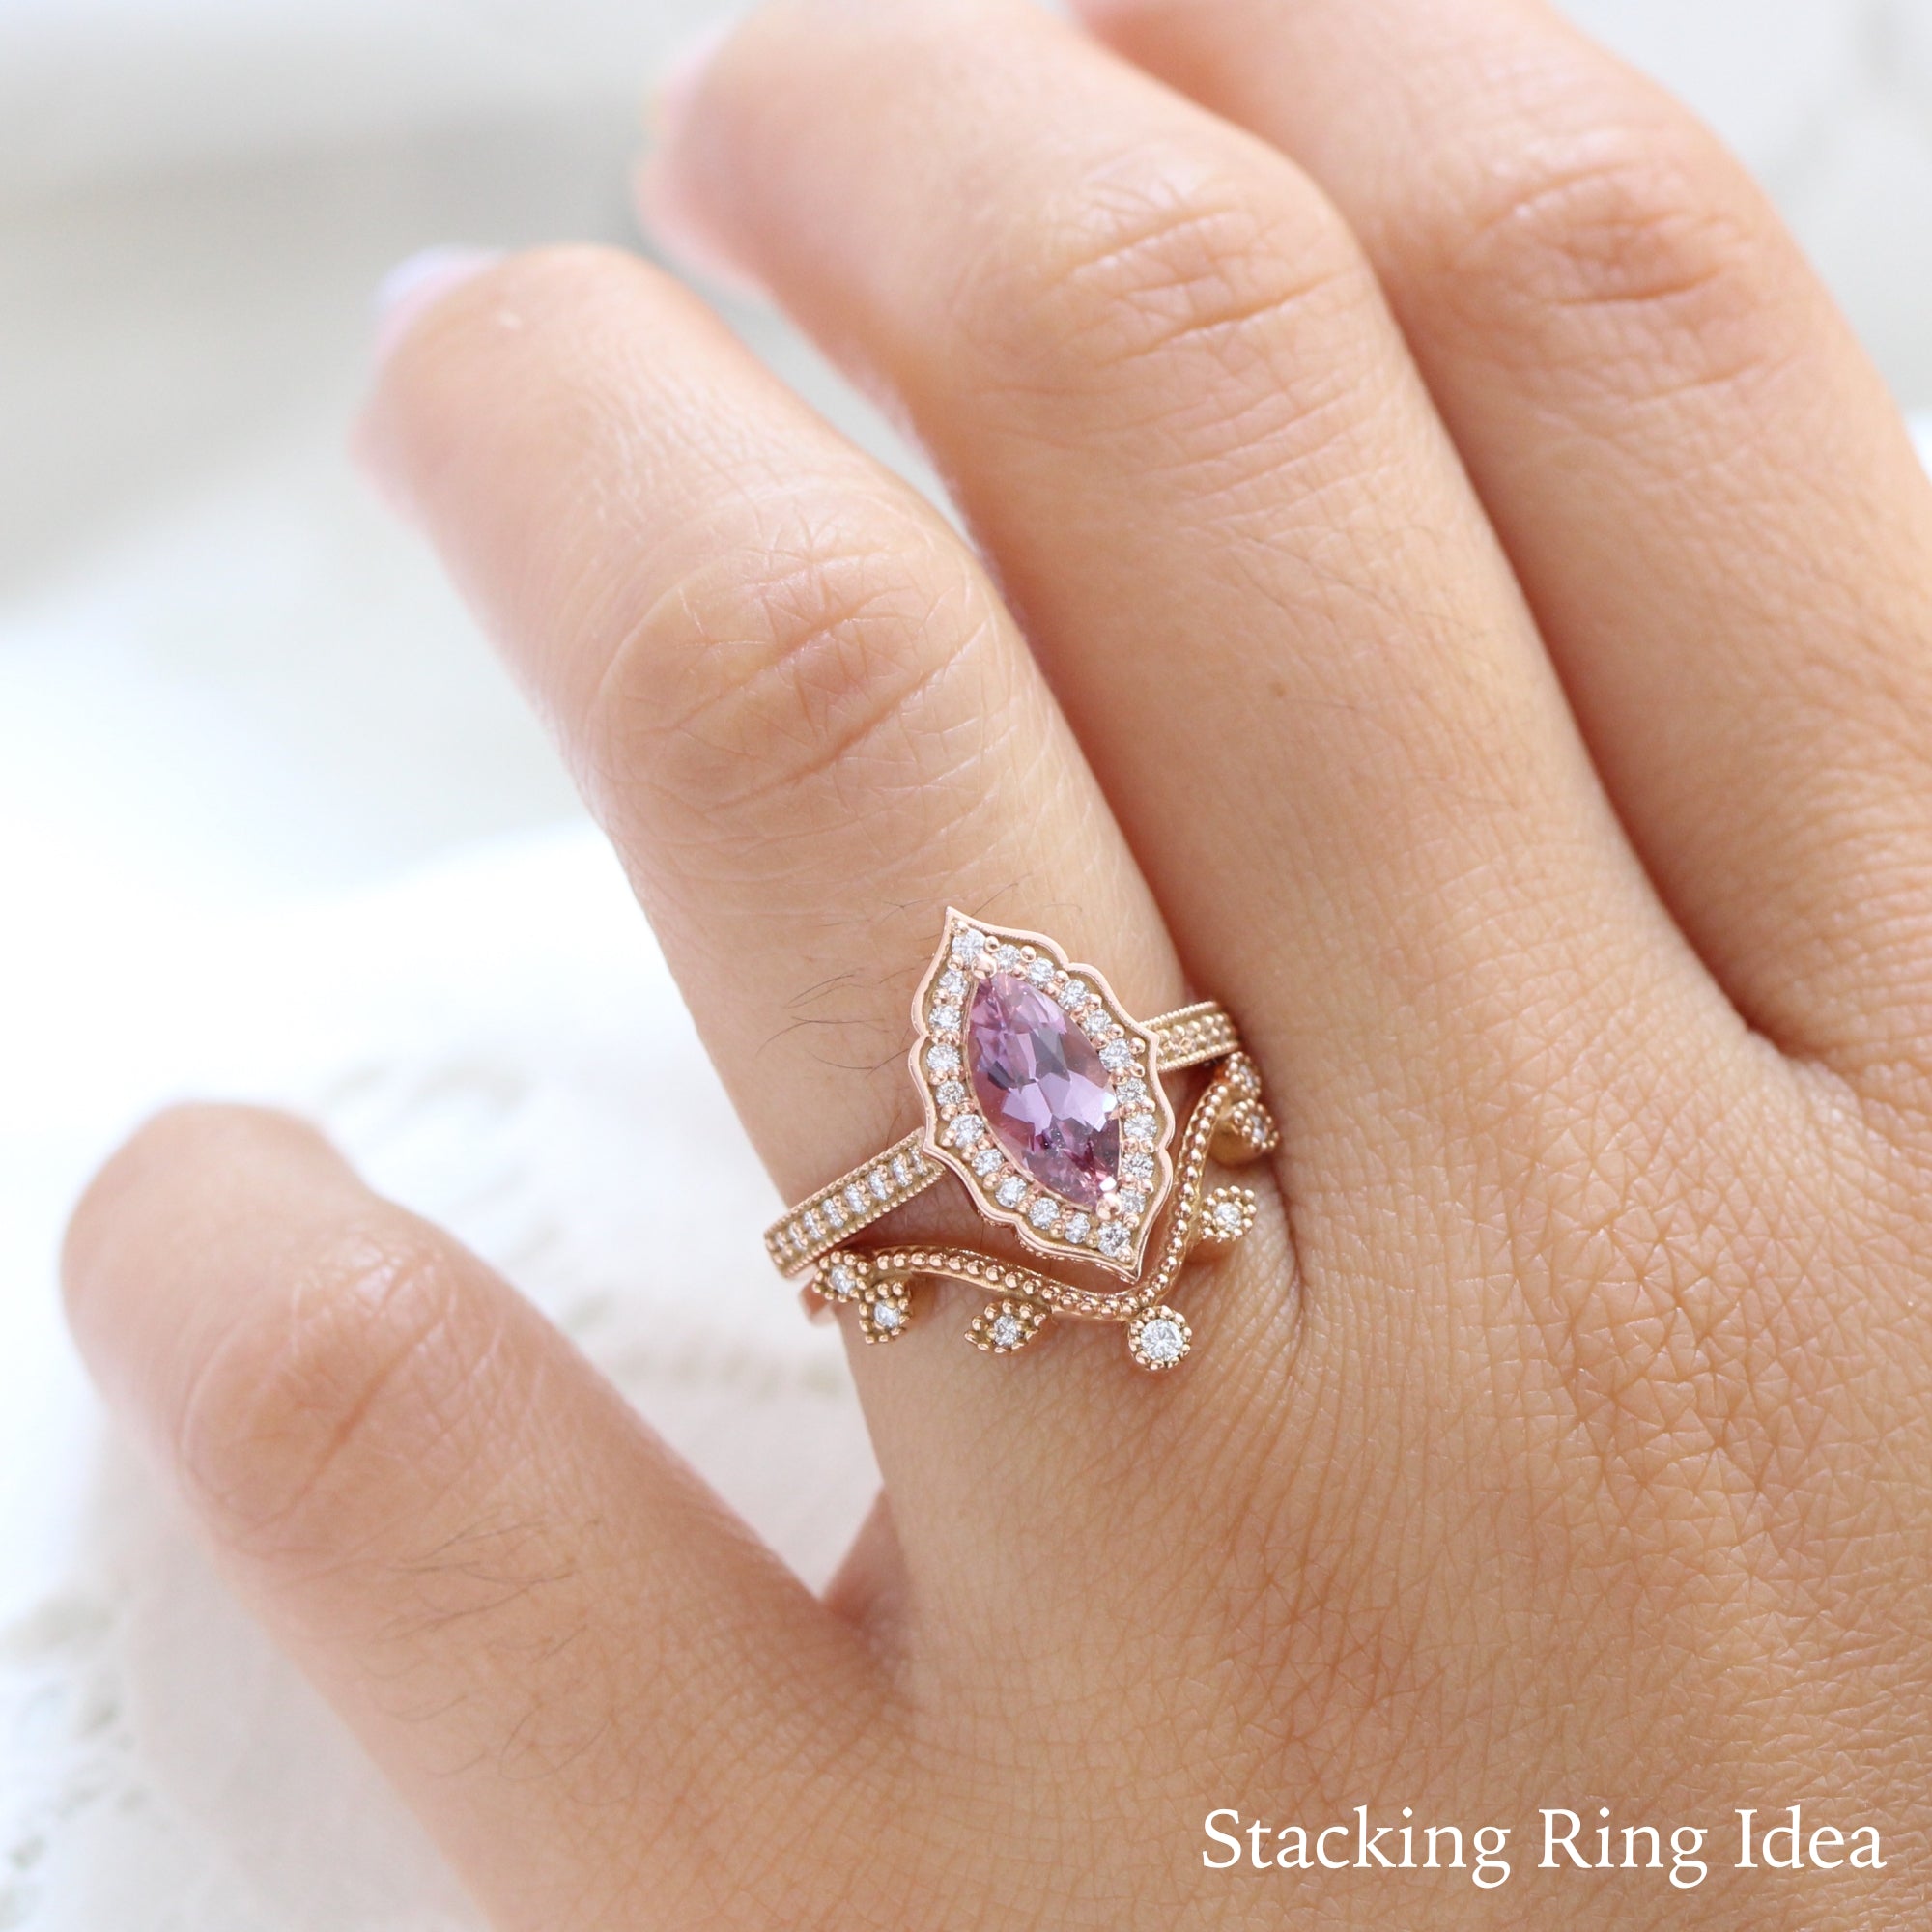 11 Things to Know About Pink Diamonds | Jewelry Guide